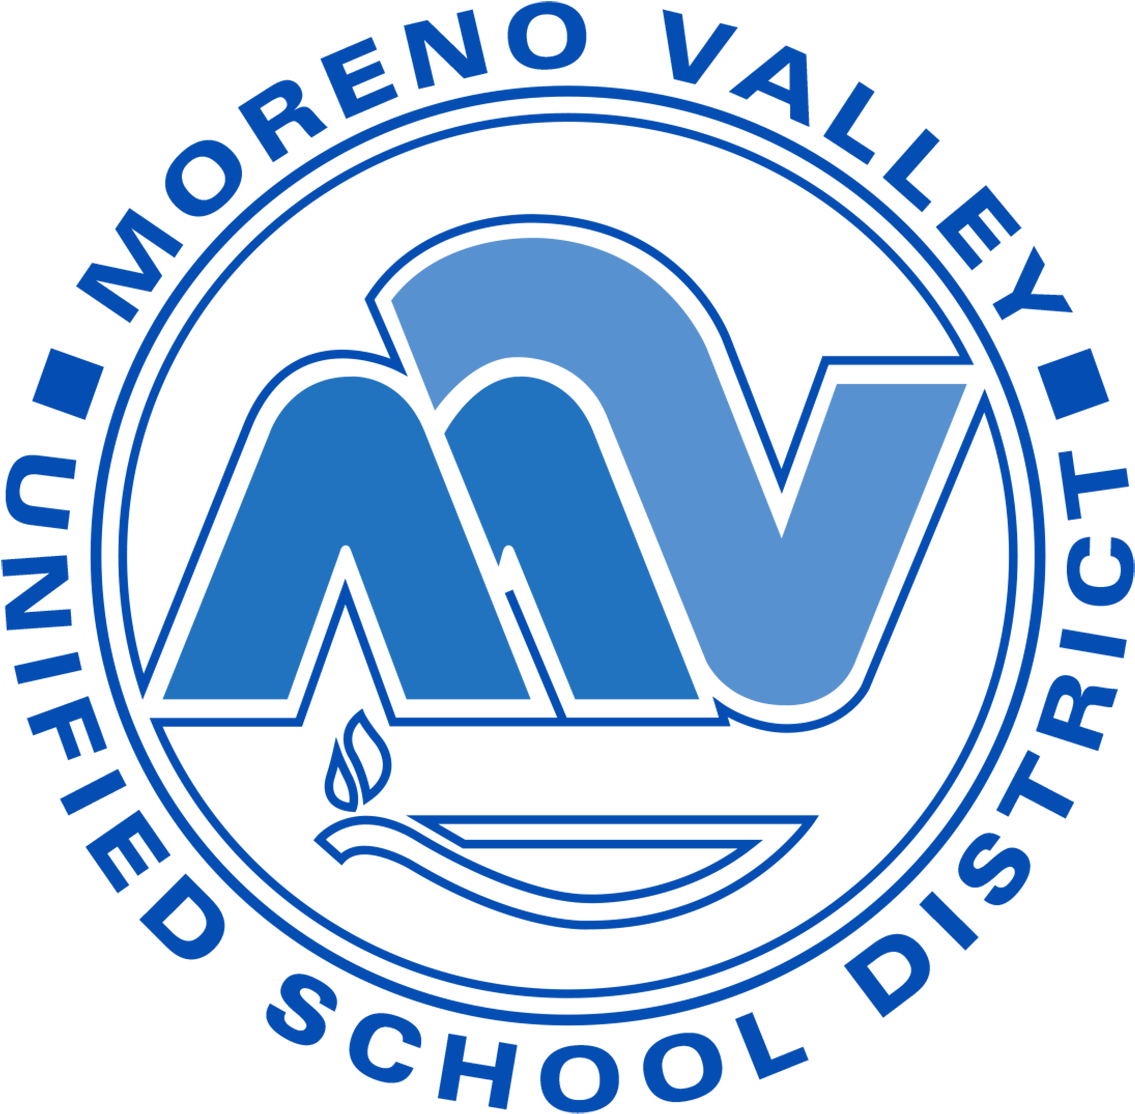 We Are Trusted By California's Leading School Districts, - Moreno Valley Unified School District (1200x1200)